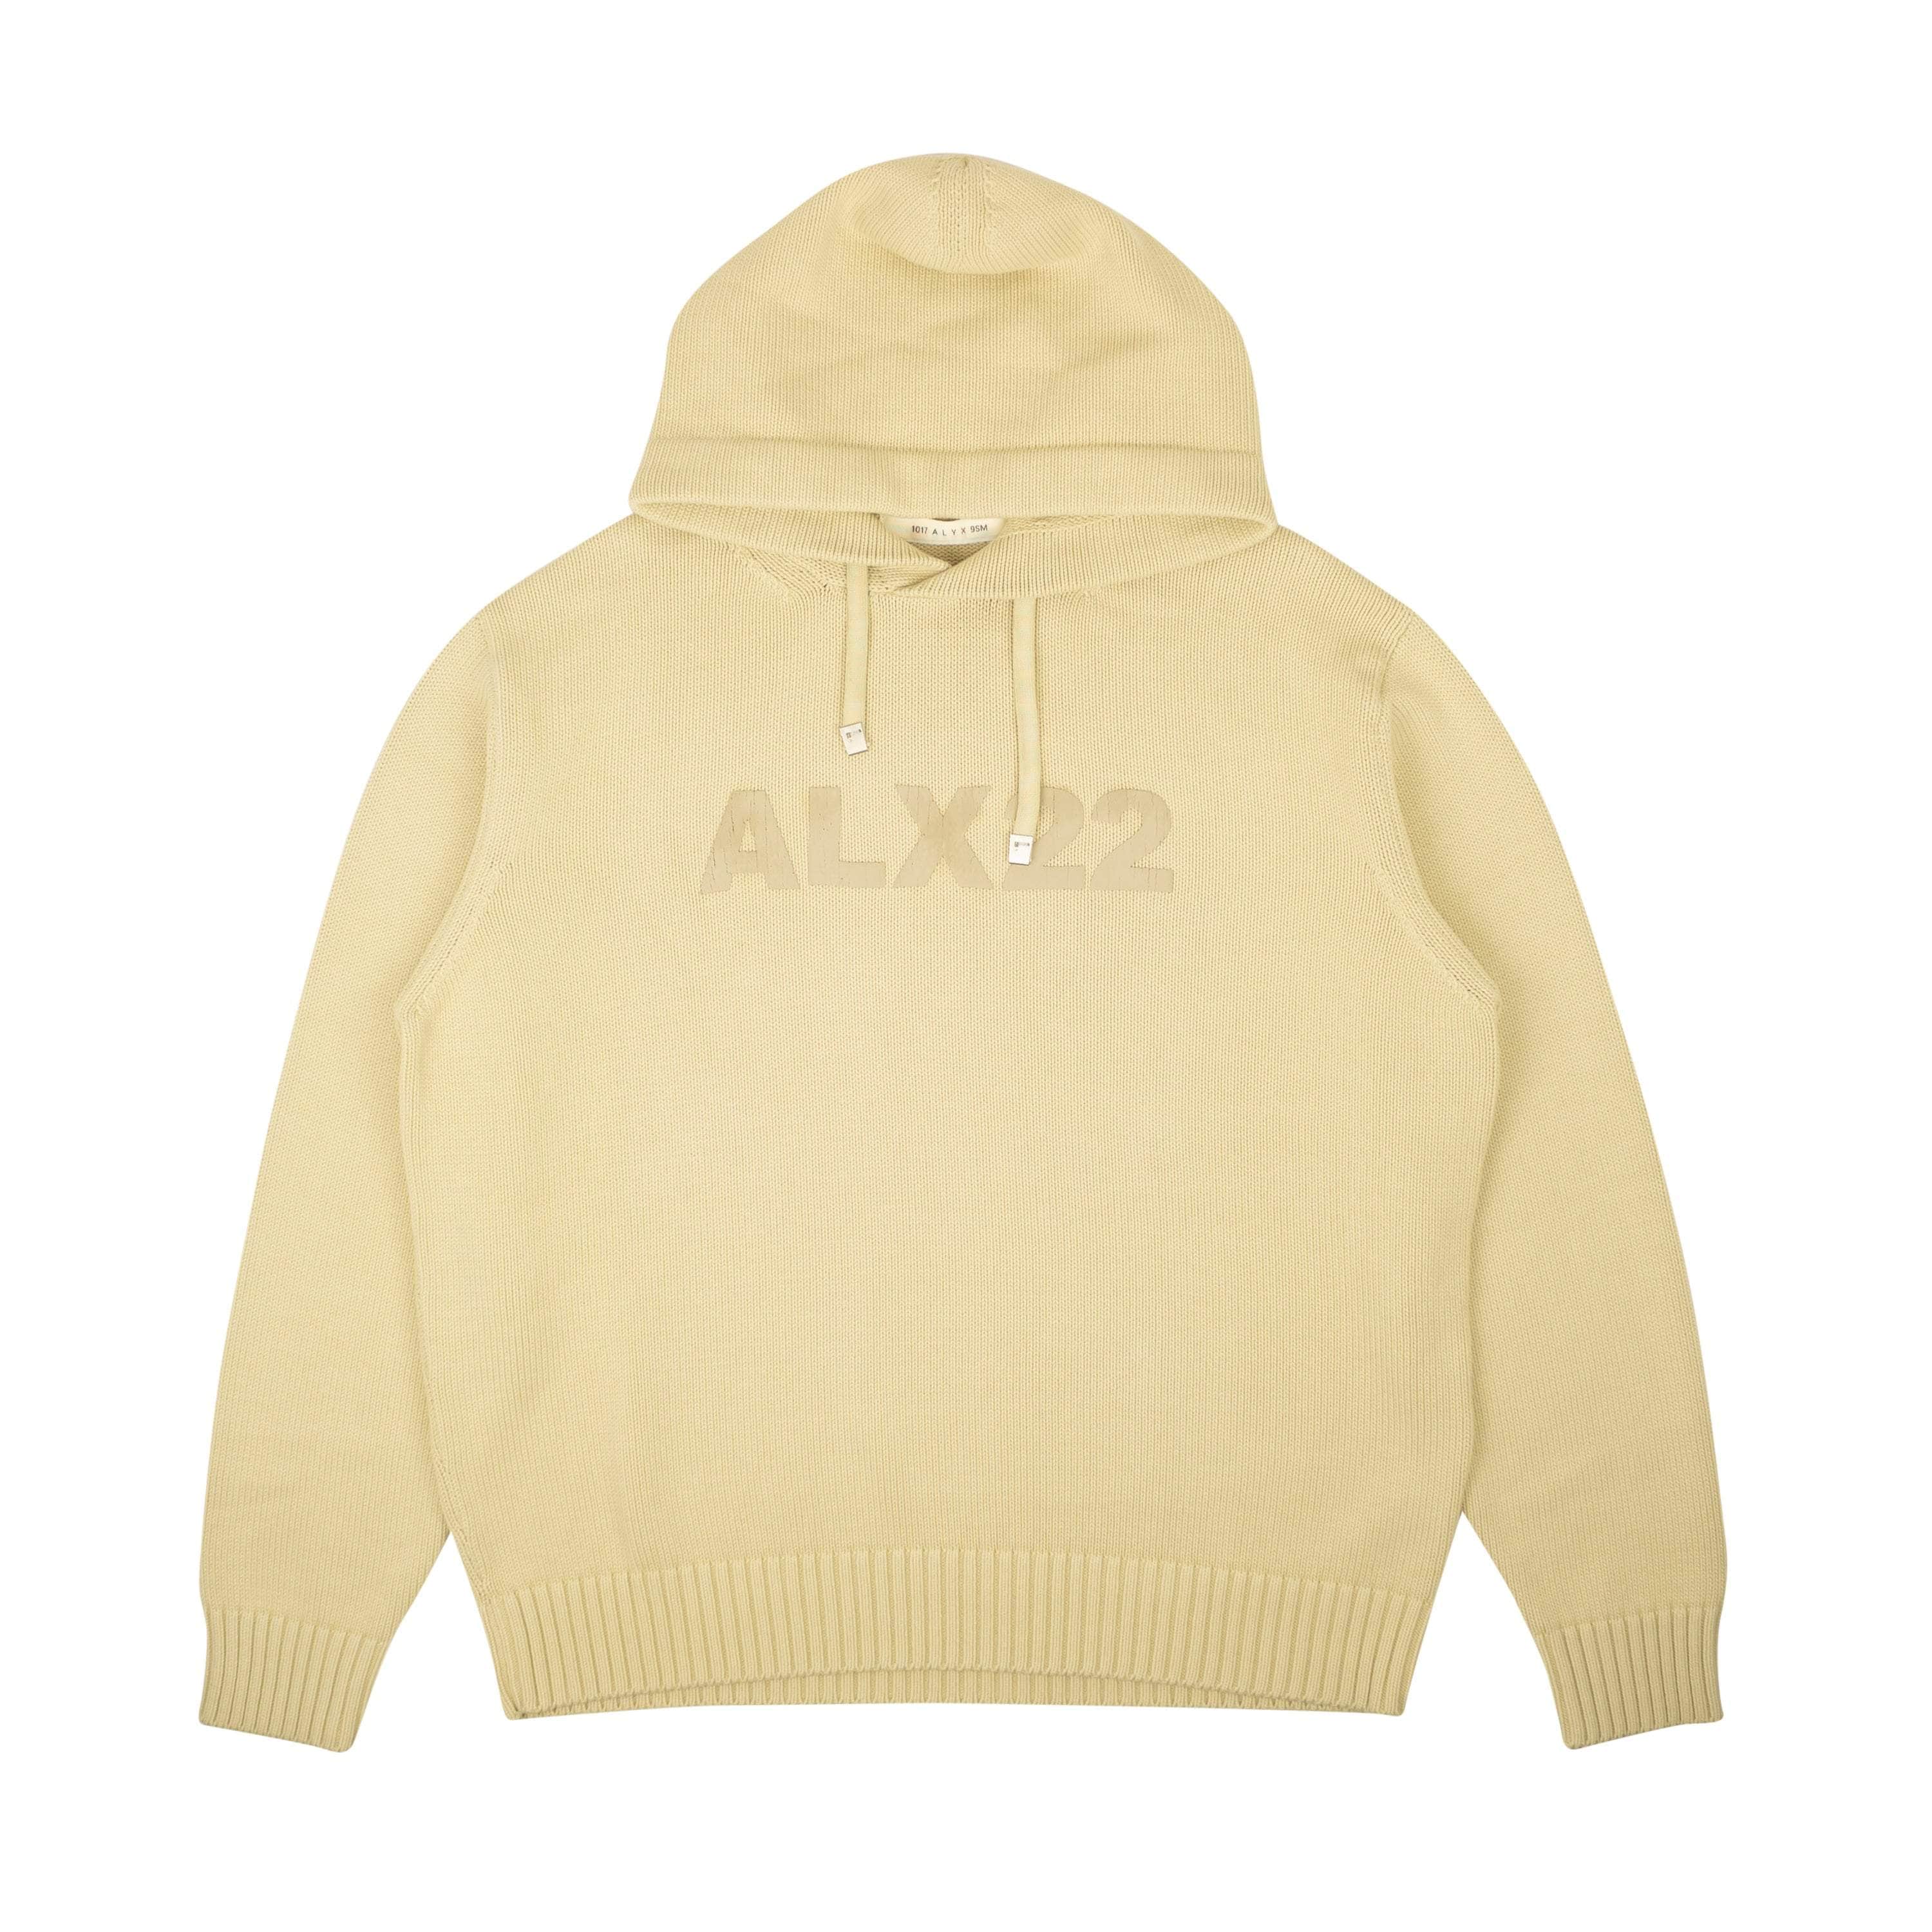 Alyx 500-750, alyx, channelenable-all, chicmi, couponcollection, gender-mens, main-clothing, mens-shoes, size-l, size-m Beige Treated Logo Knit Hoodie